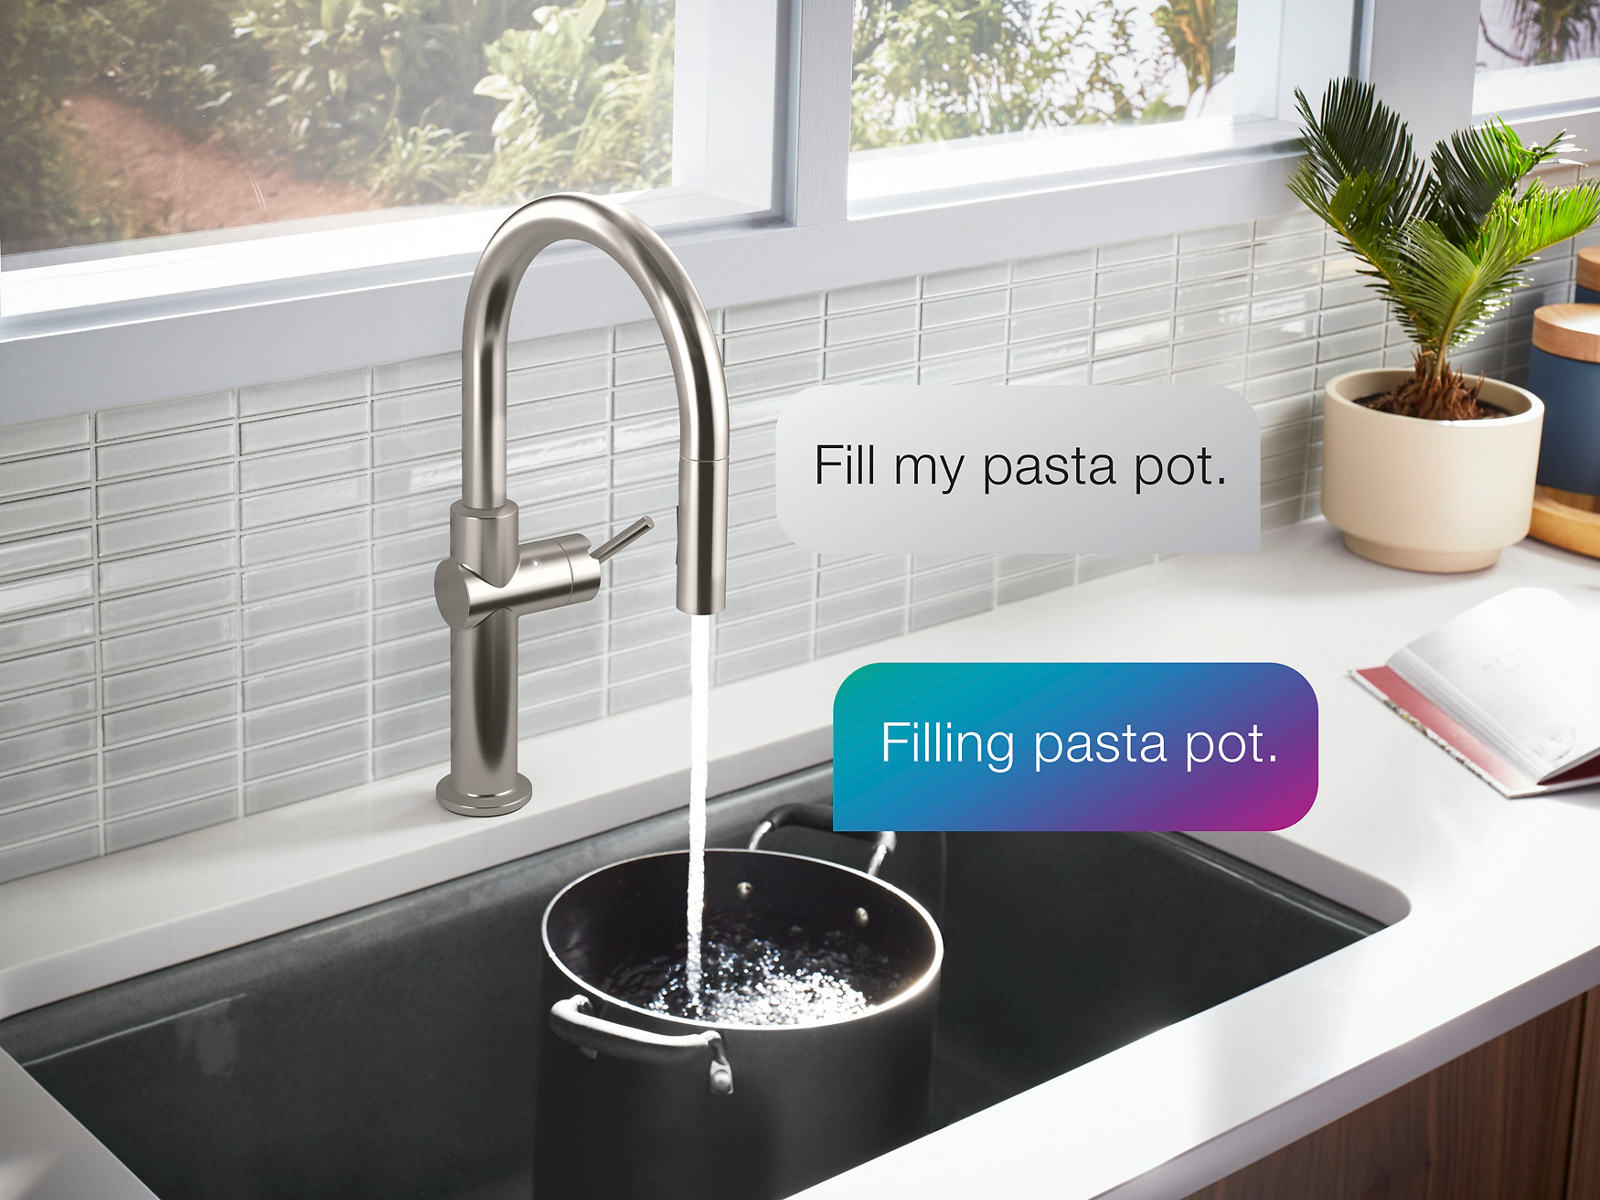 Water flows from a KOHLER voice-activated faucet into a pasta pot sitting in the sink.